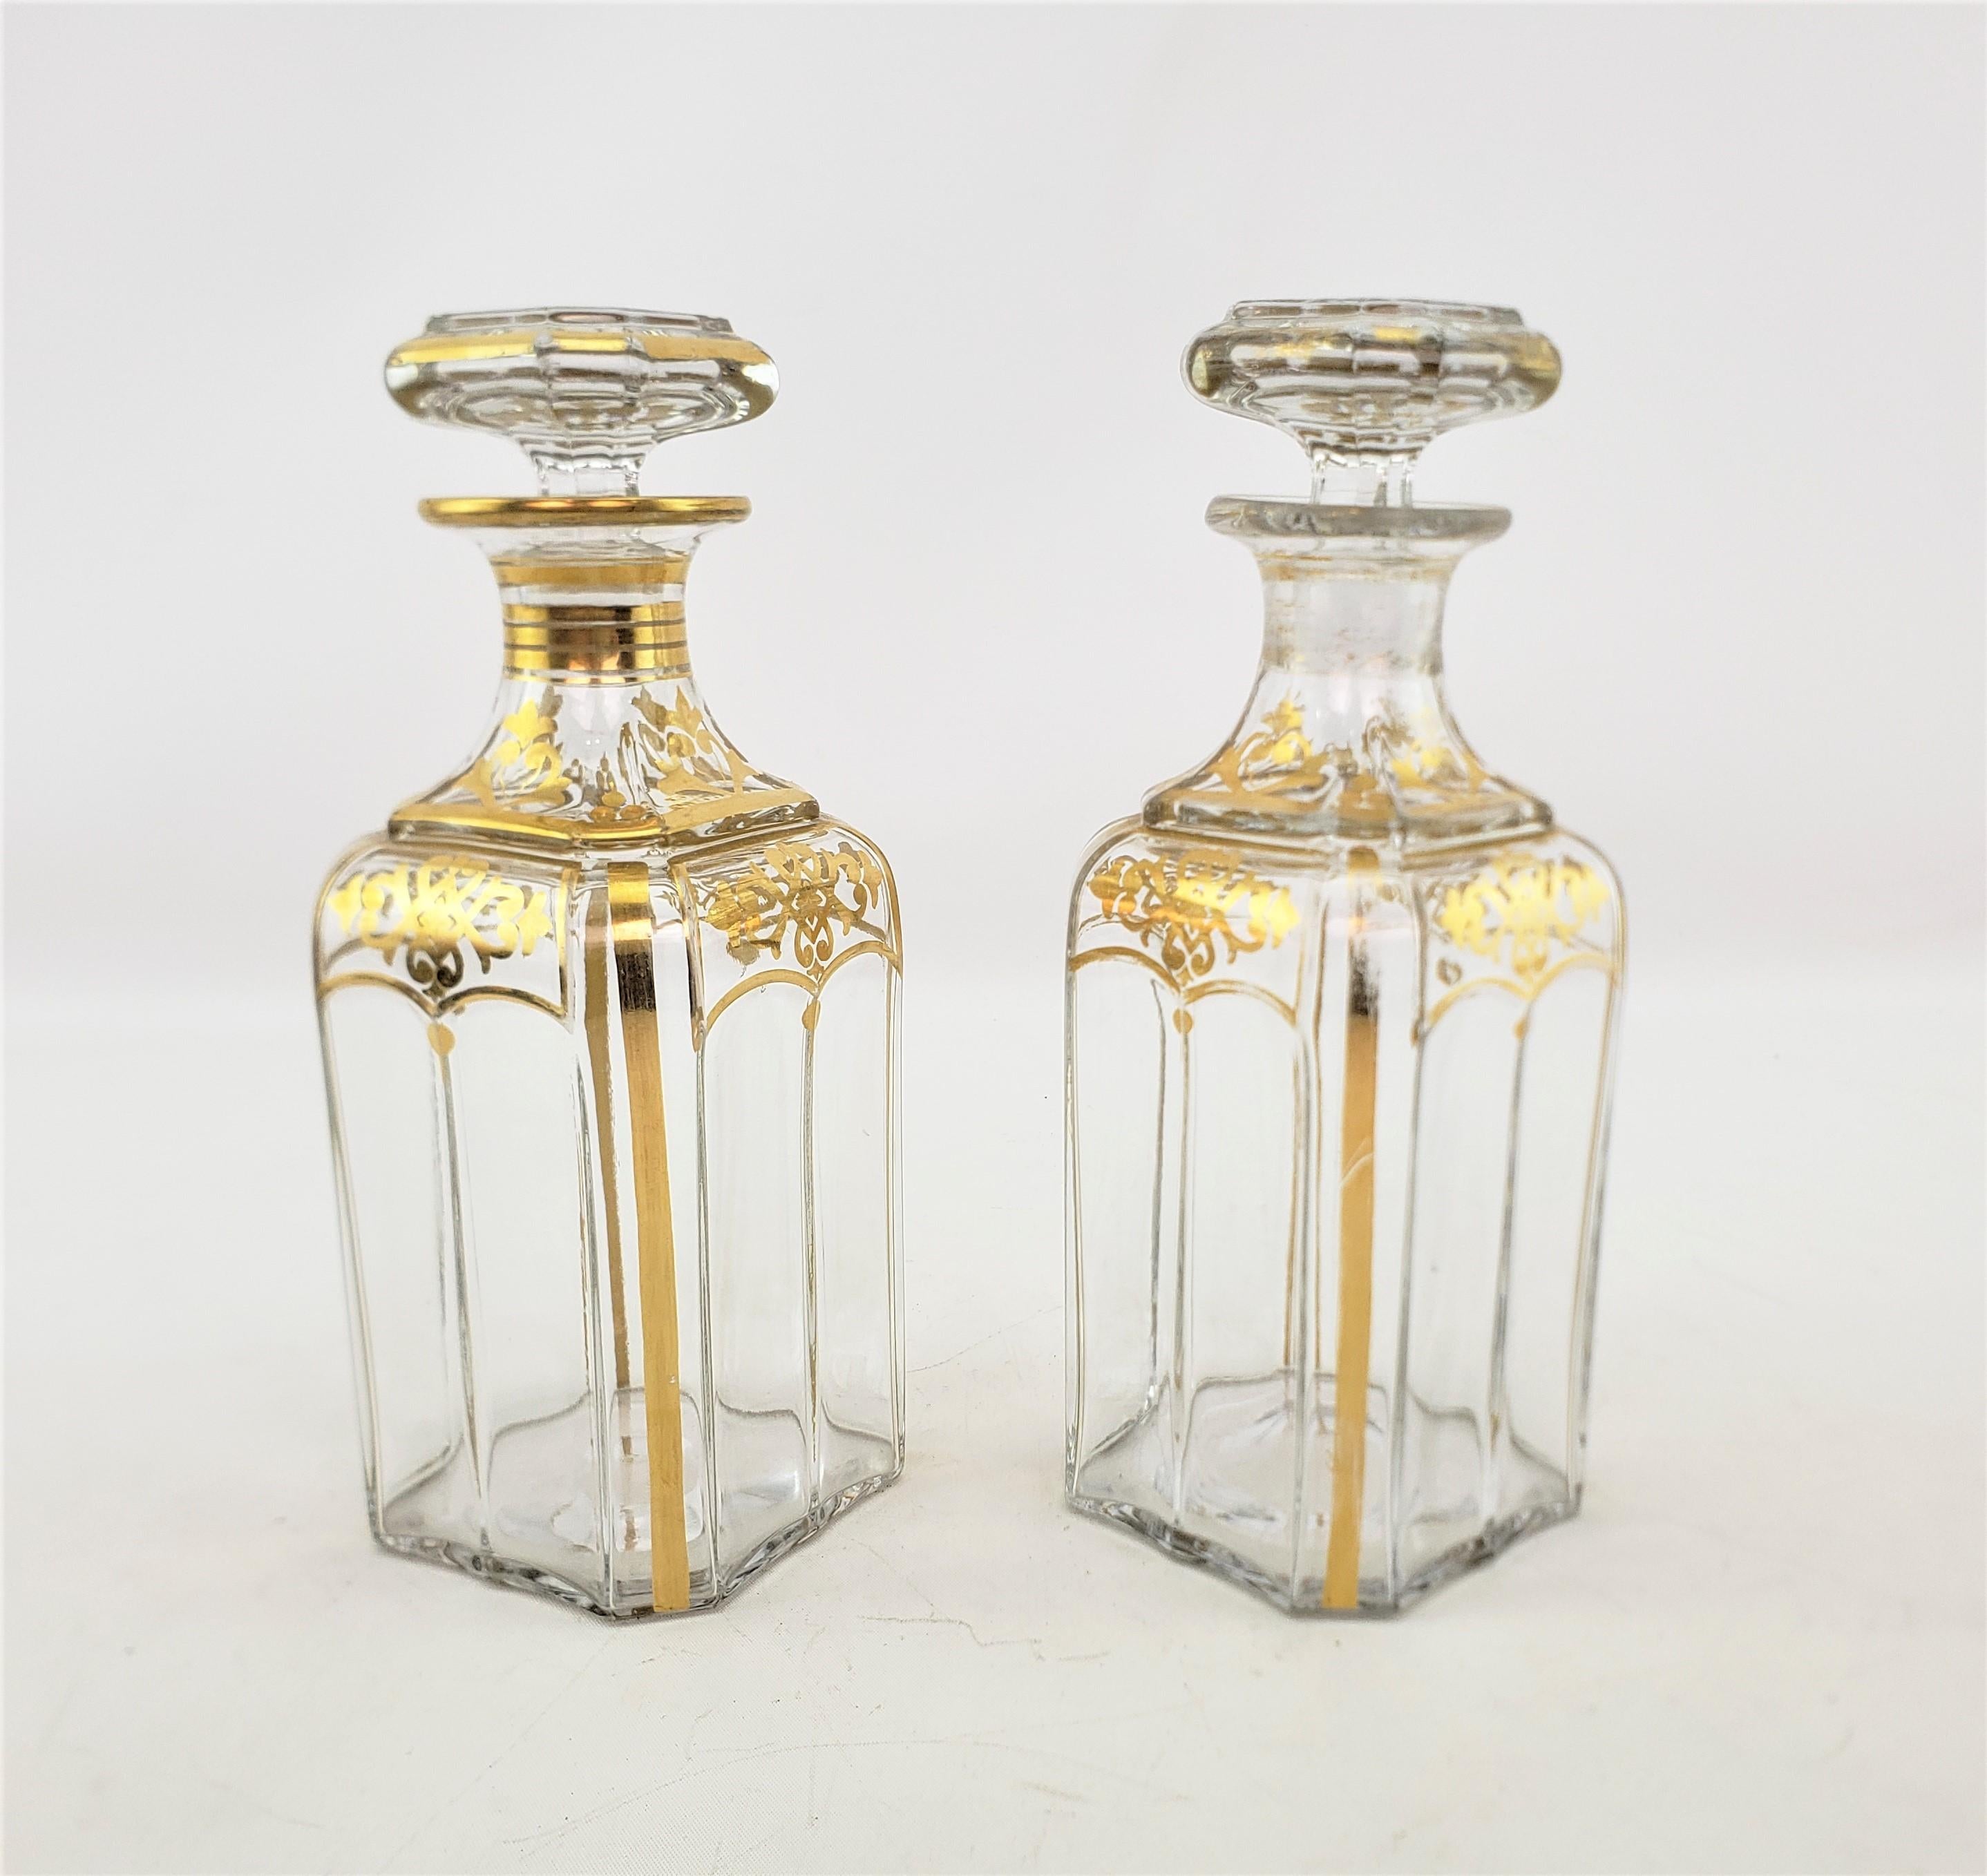 Empire Revival Pair of Antique French Clear Crystal Bottle Decanters with Gilt Decoration For Sale